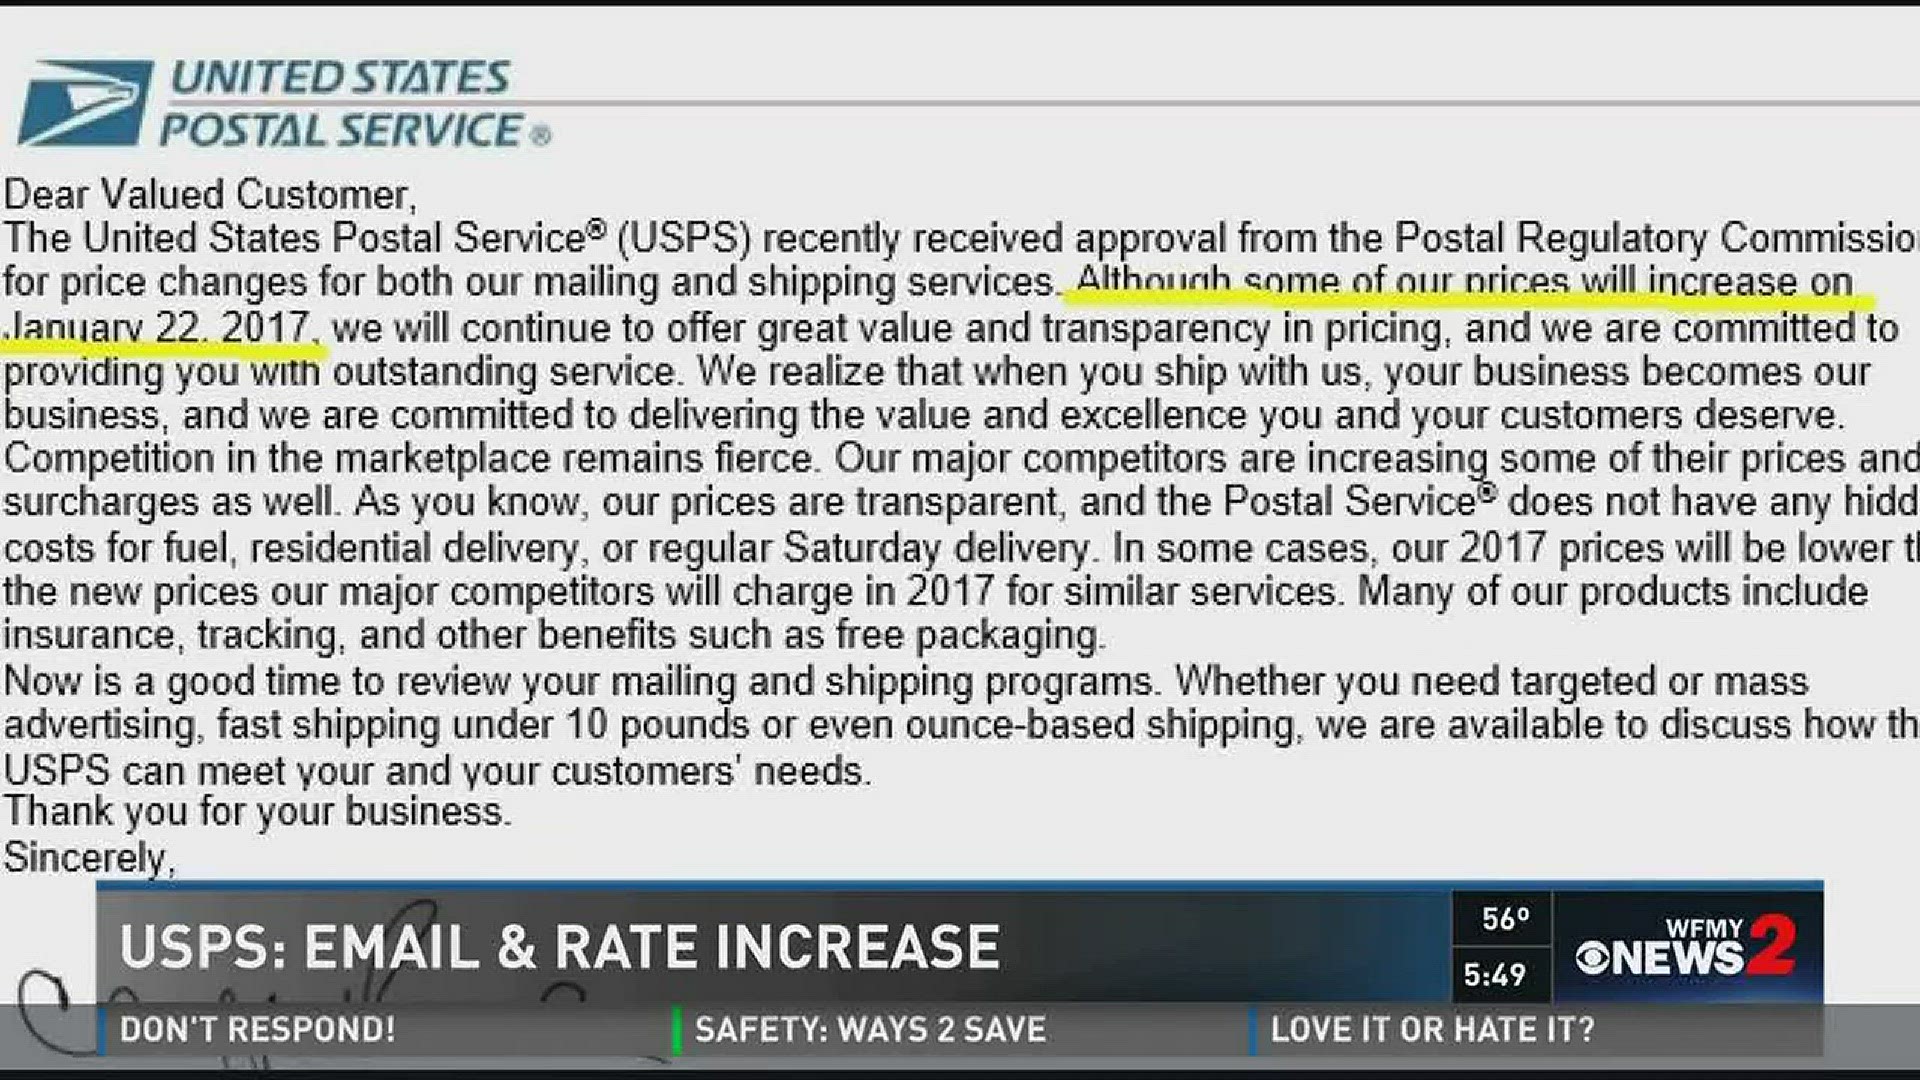 USPS Email and Rate Increase